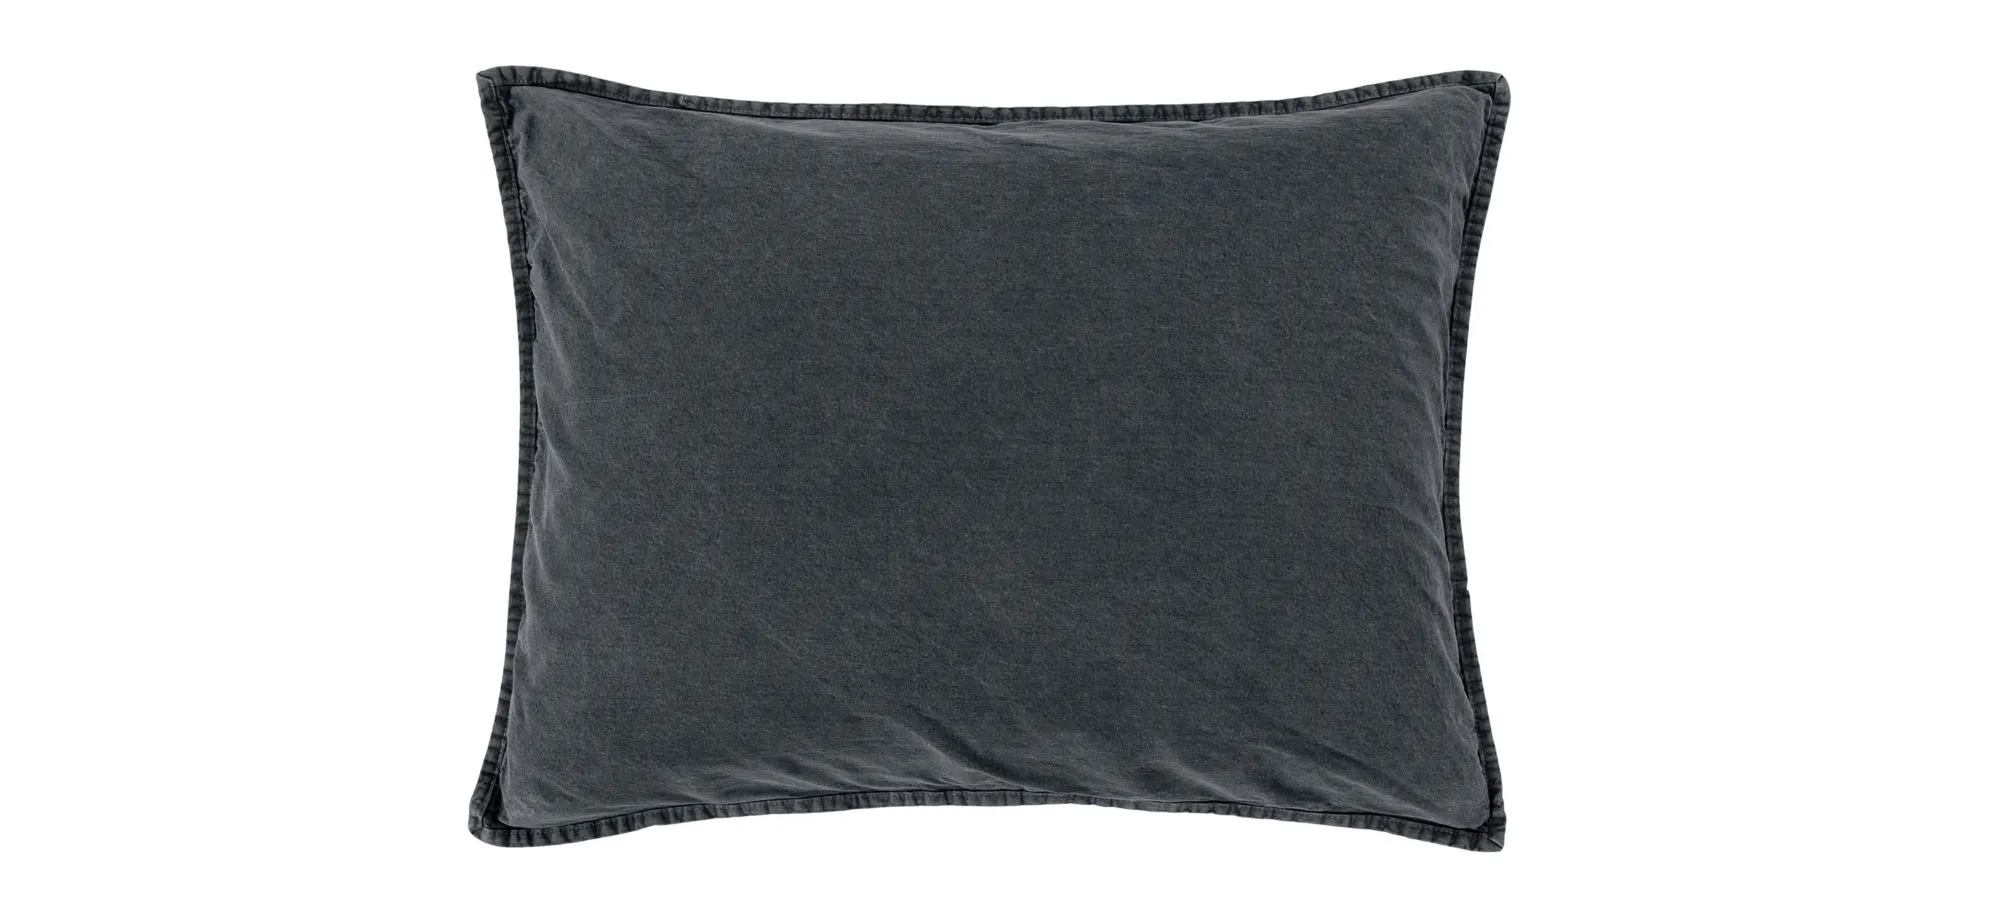 Twombly Pillow Sham in Charcoal by HiEnd Accents